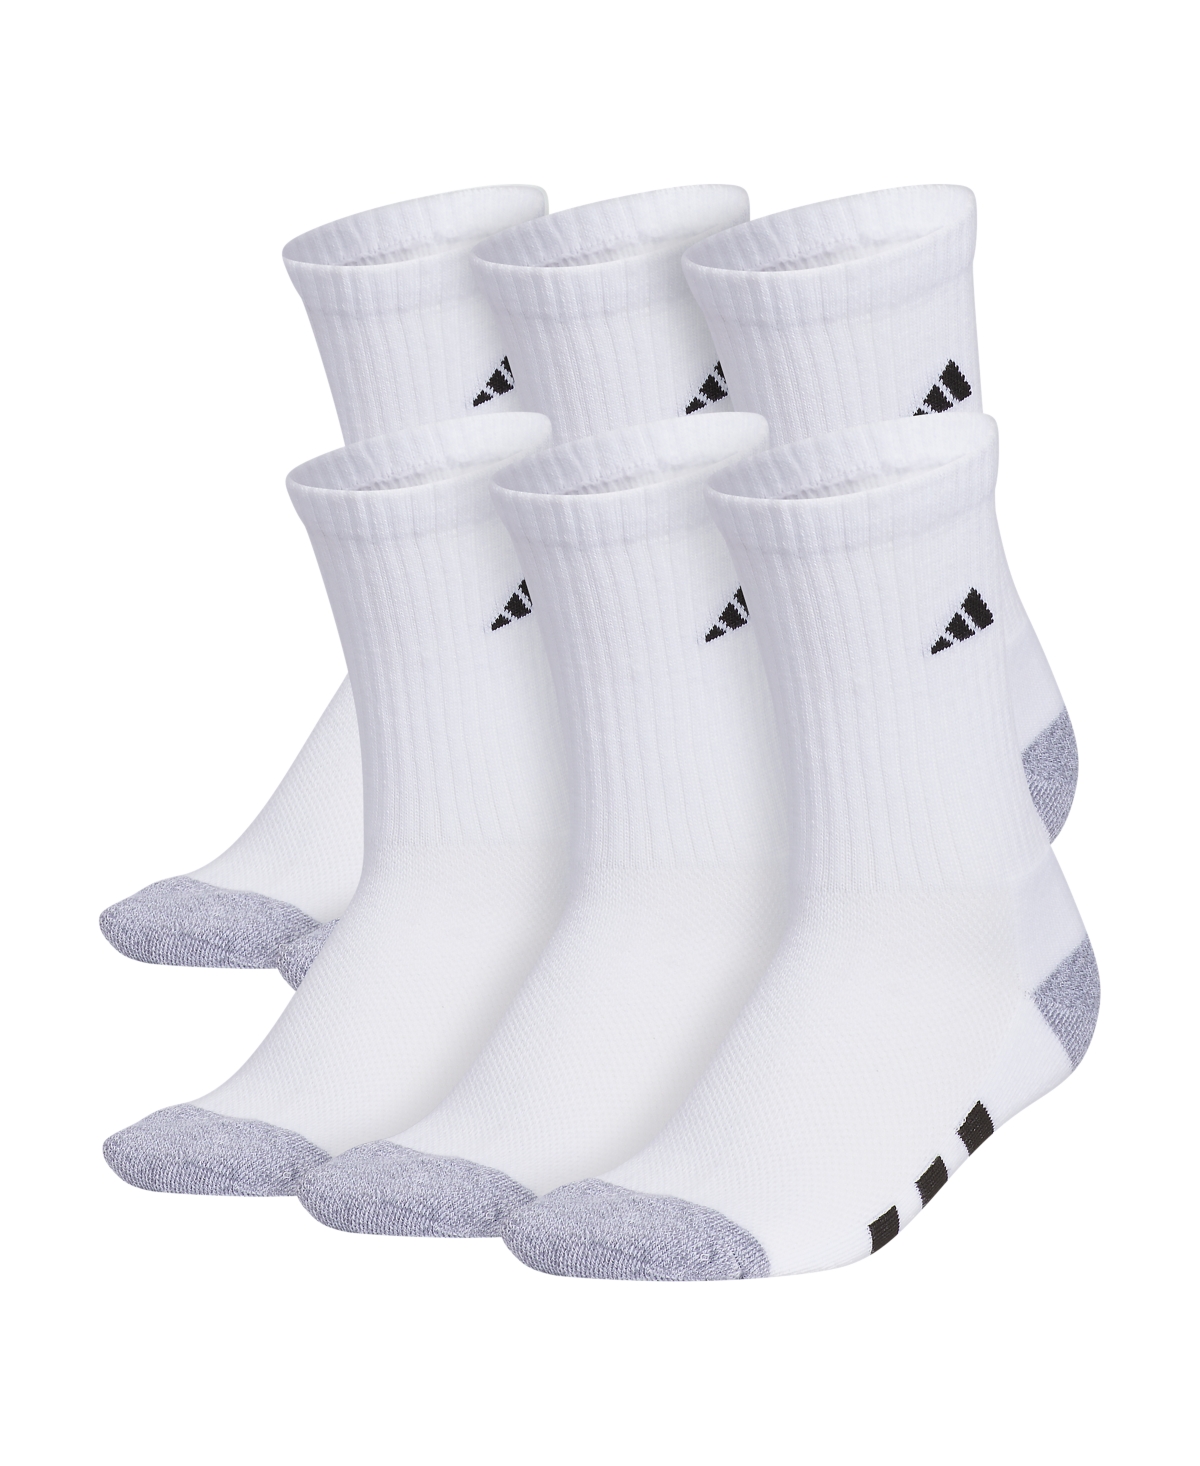 Shop Adidas Originals Boys Youth Athletic Cushioned Crew Socks, Pack Of 6 In White